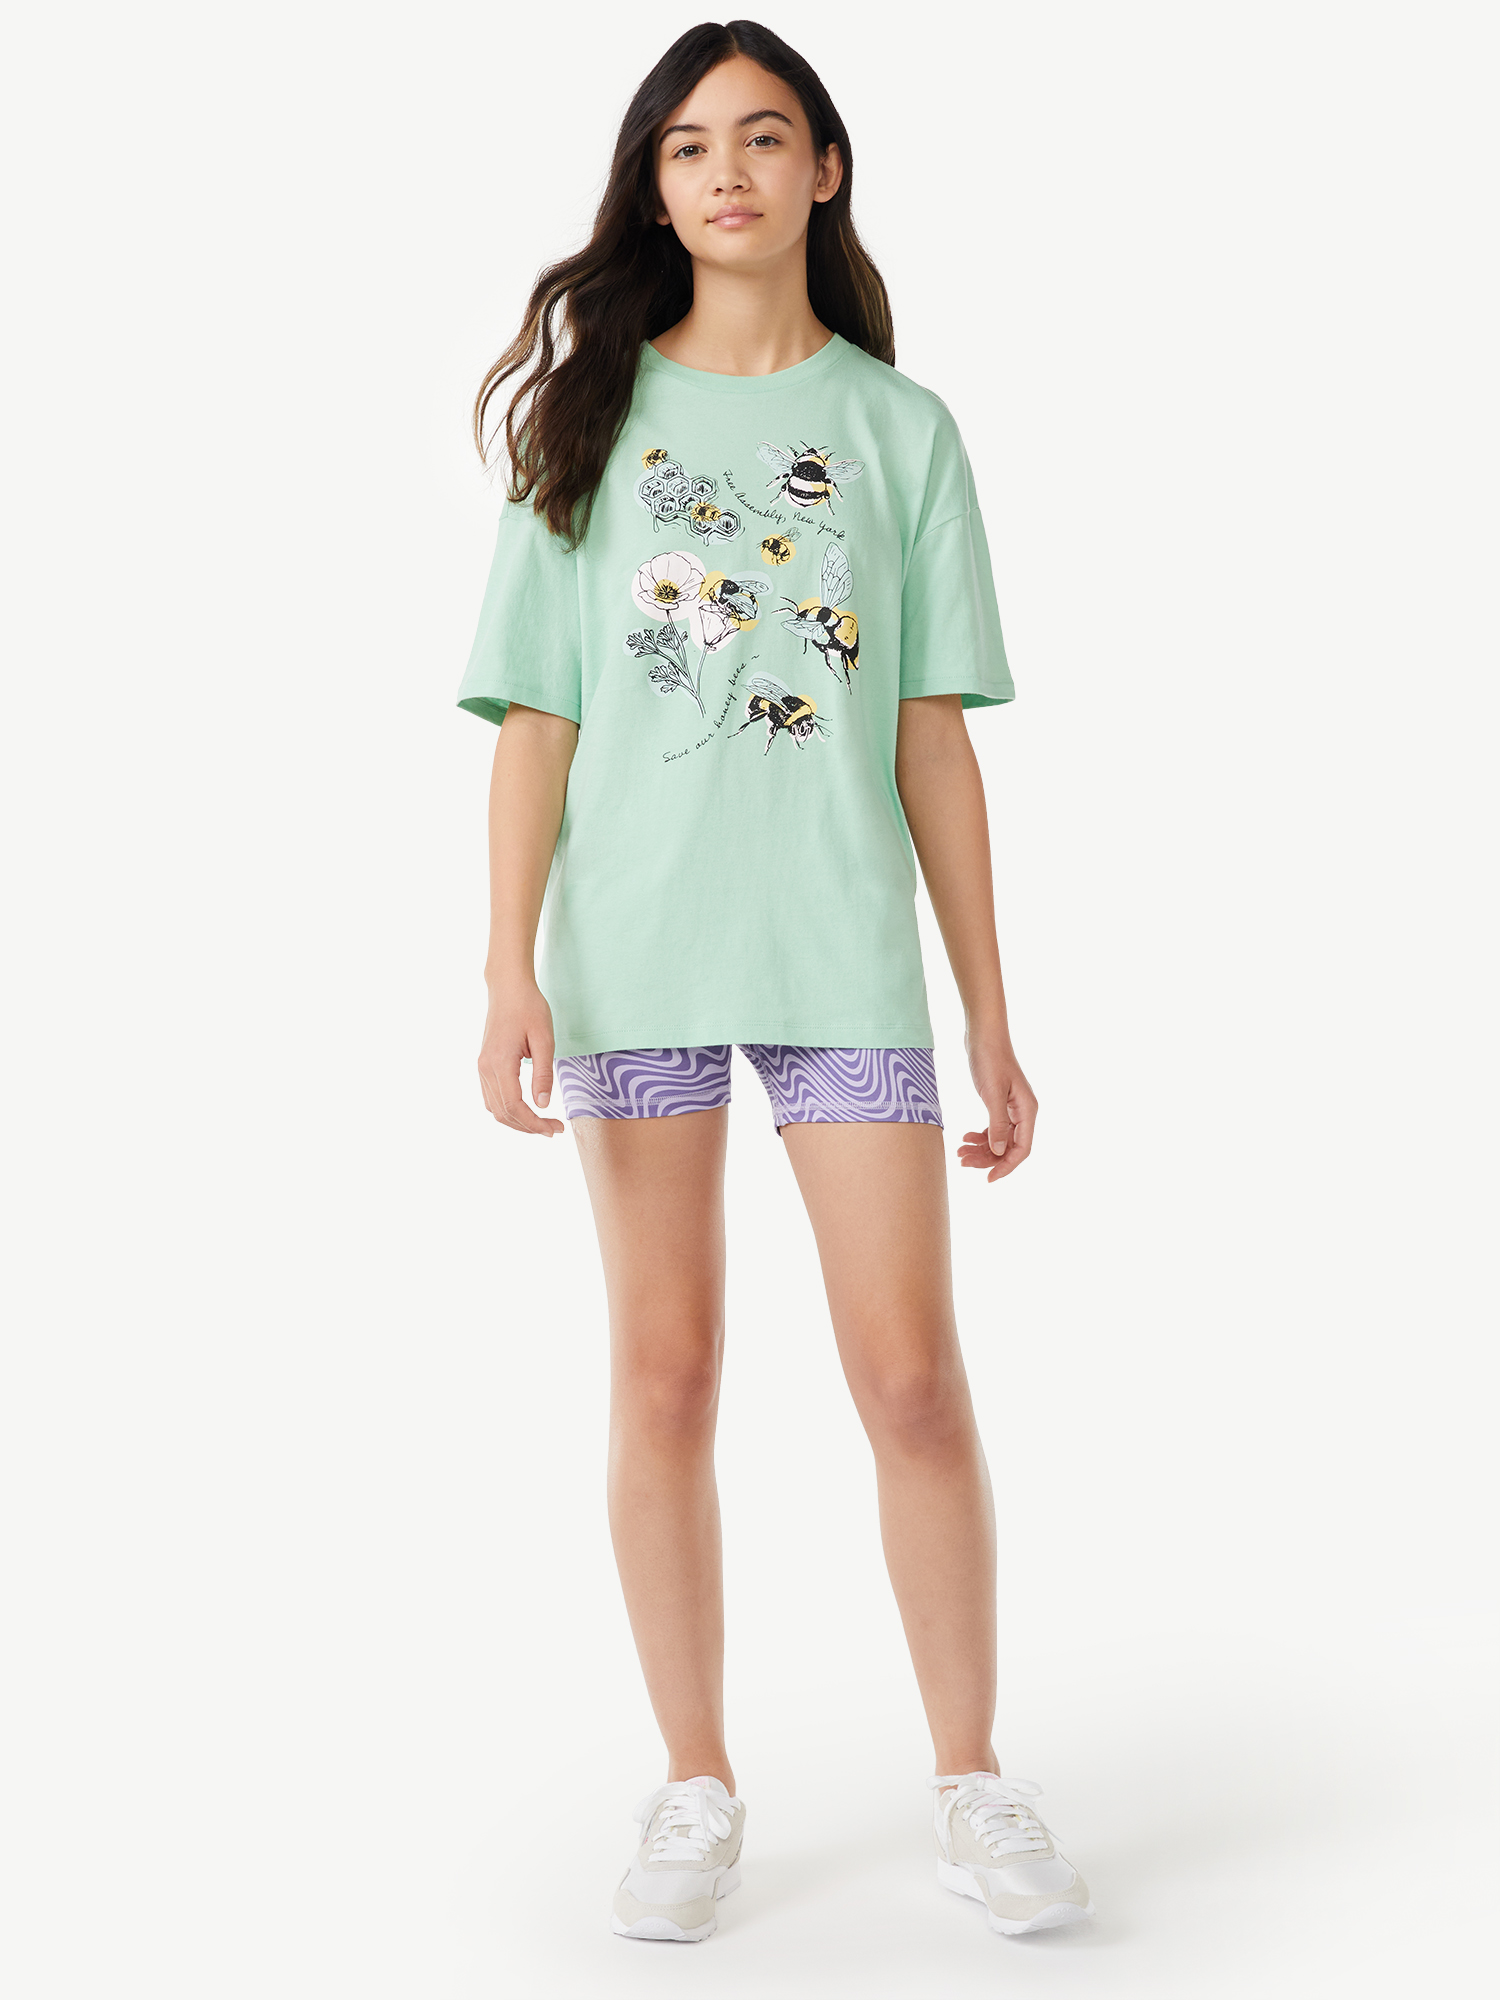 Free Assembly Girls Oversized Graphic Tee with Short Sleeves, Sizes 4-18 - image 2 of 5